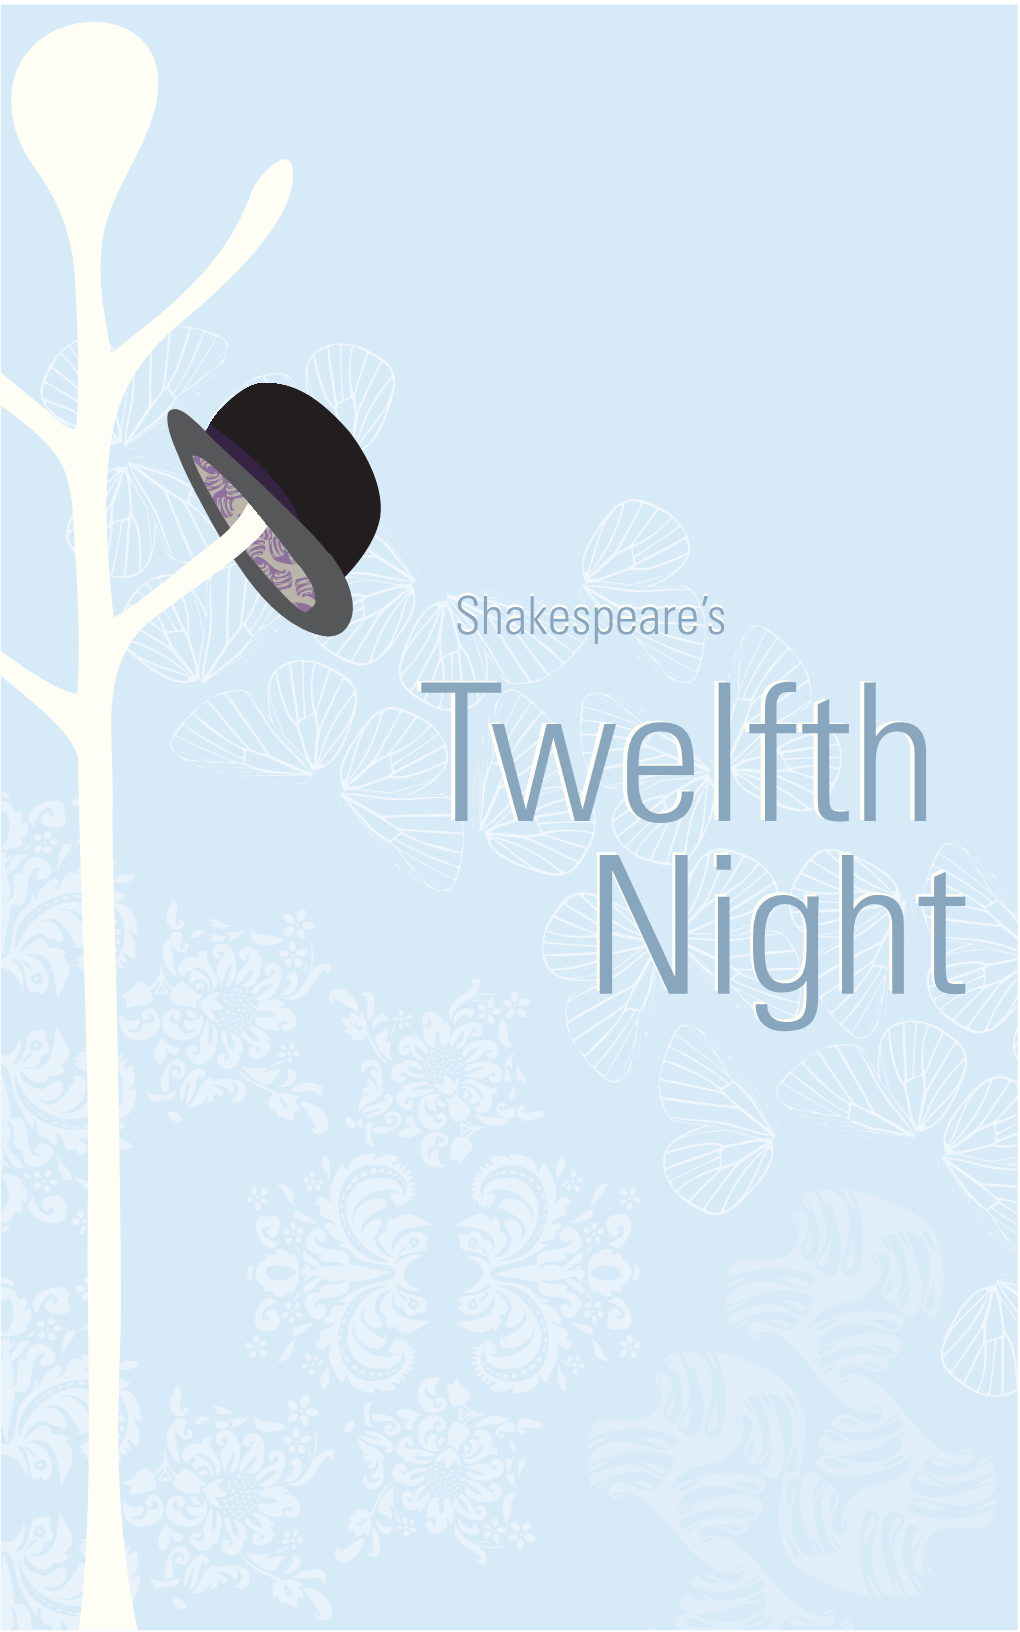 Shakespeare's Twelfth Night, Or What You Will